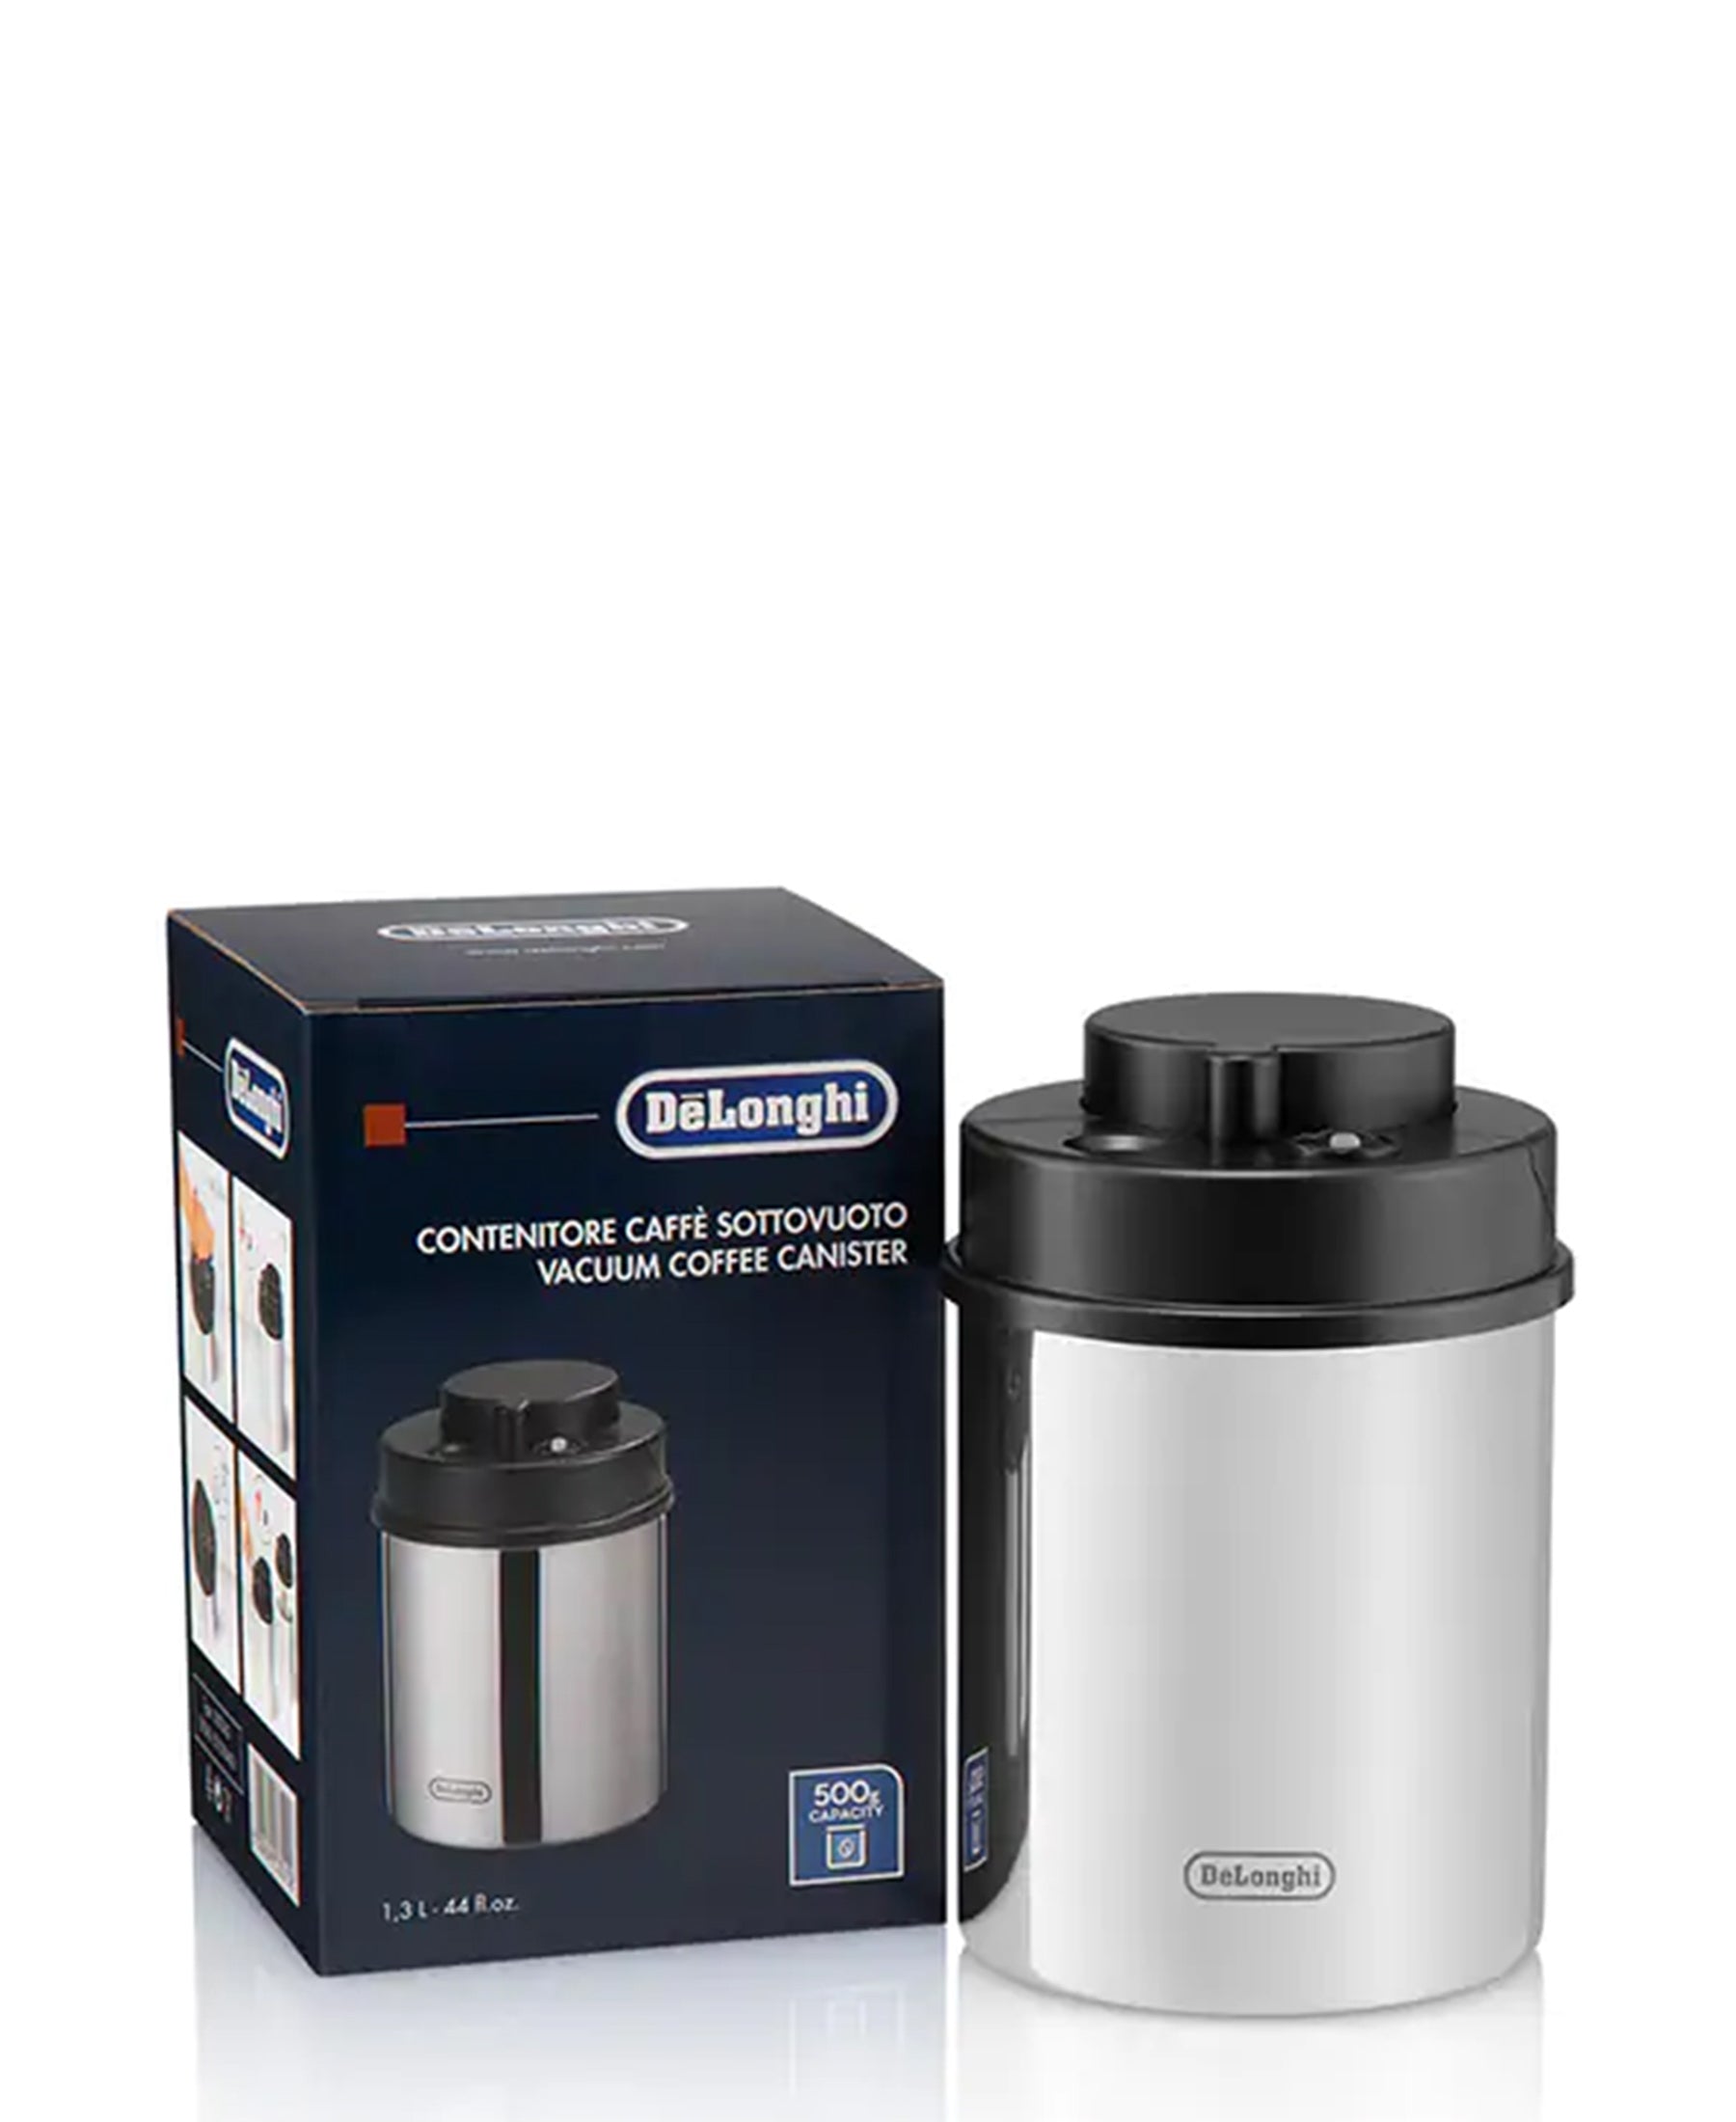 DeLonghi Vacuum Coffee Canister - Silver